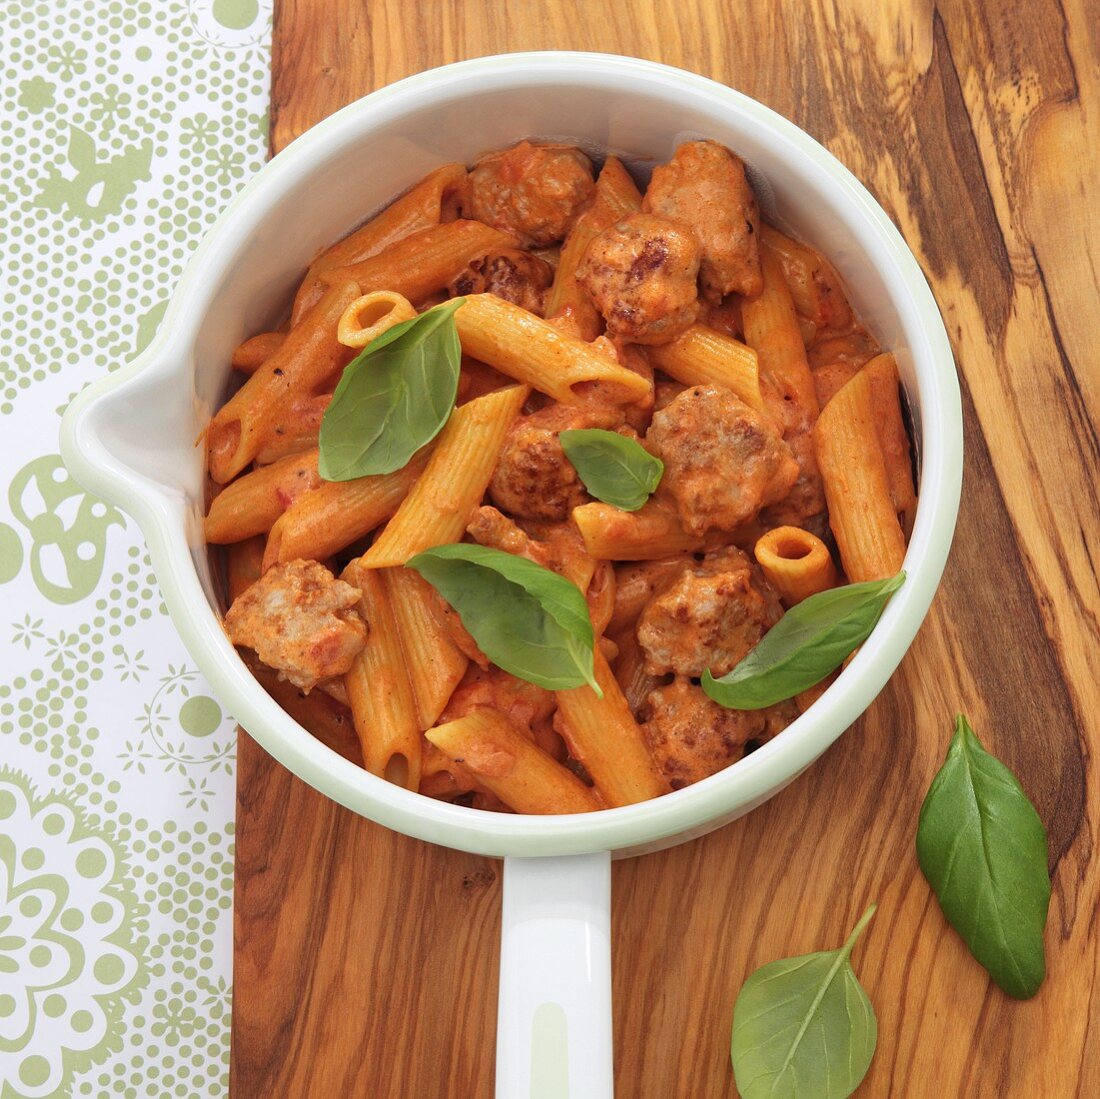 Penne with sausages and a creamy tomato sauce